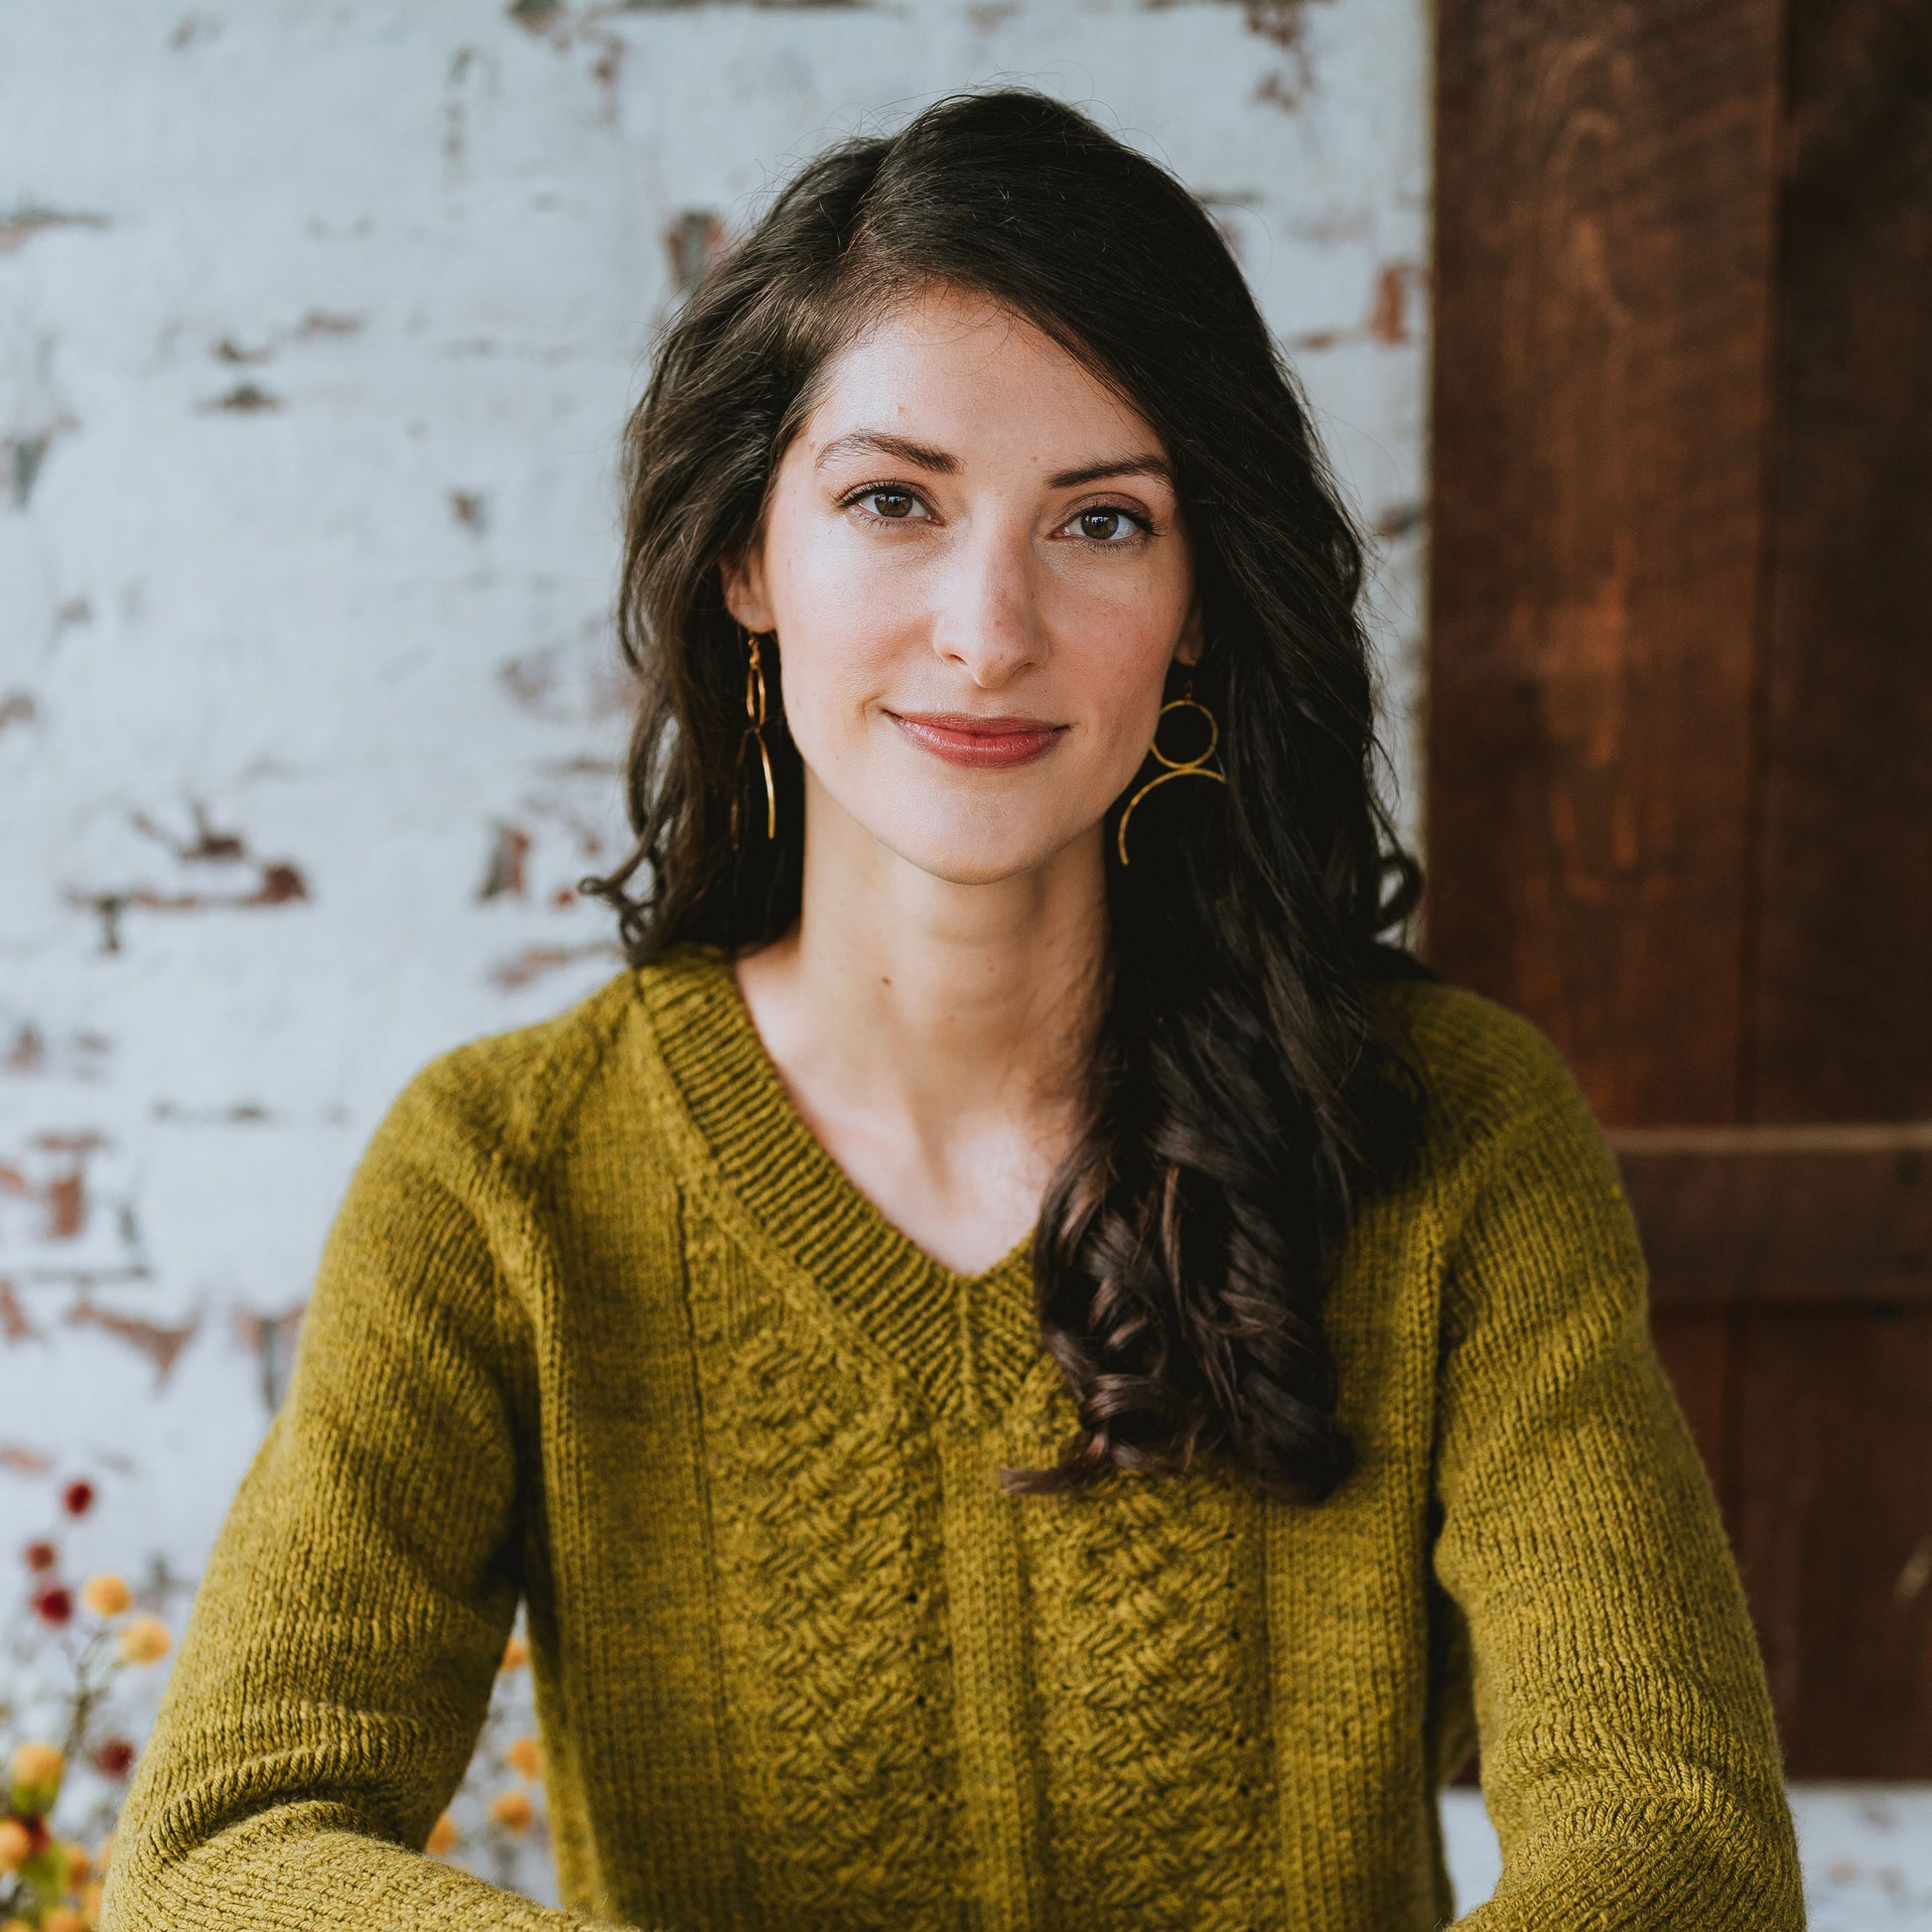 Laura sits, smiling at the camera, wearing a golden colored hand knit sweater. The sweater has two cable braids down the front and a ribbed V-neck neckband.